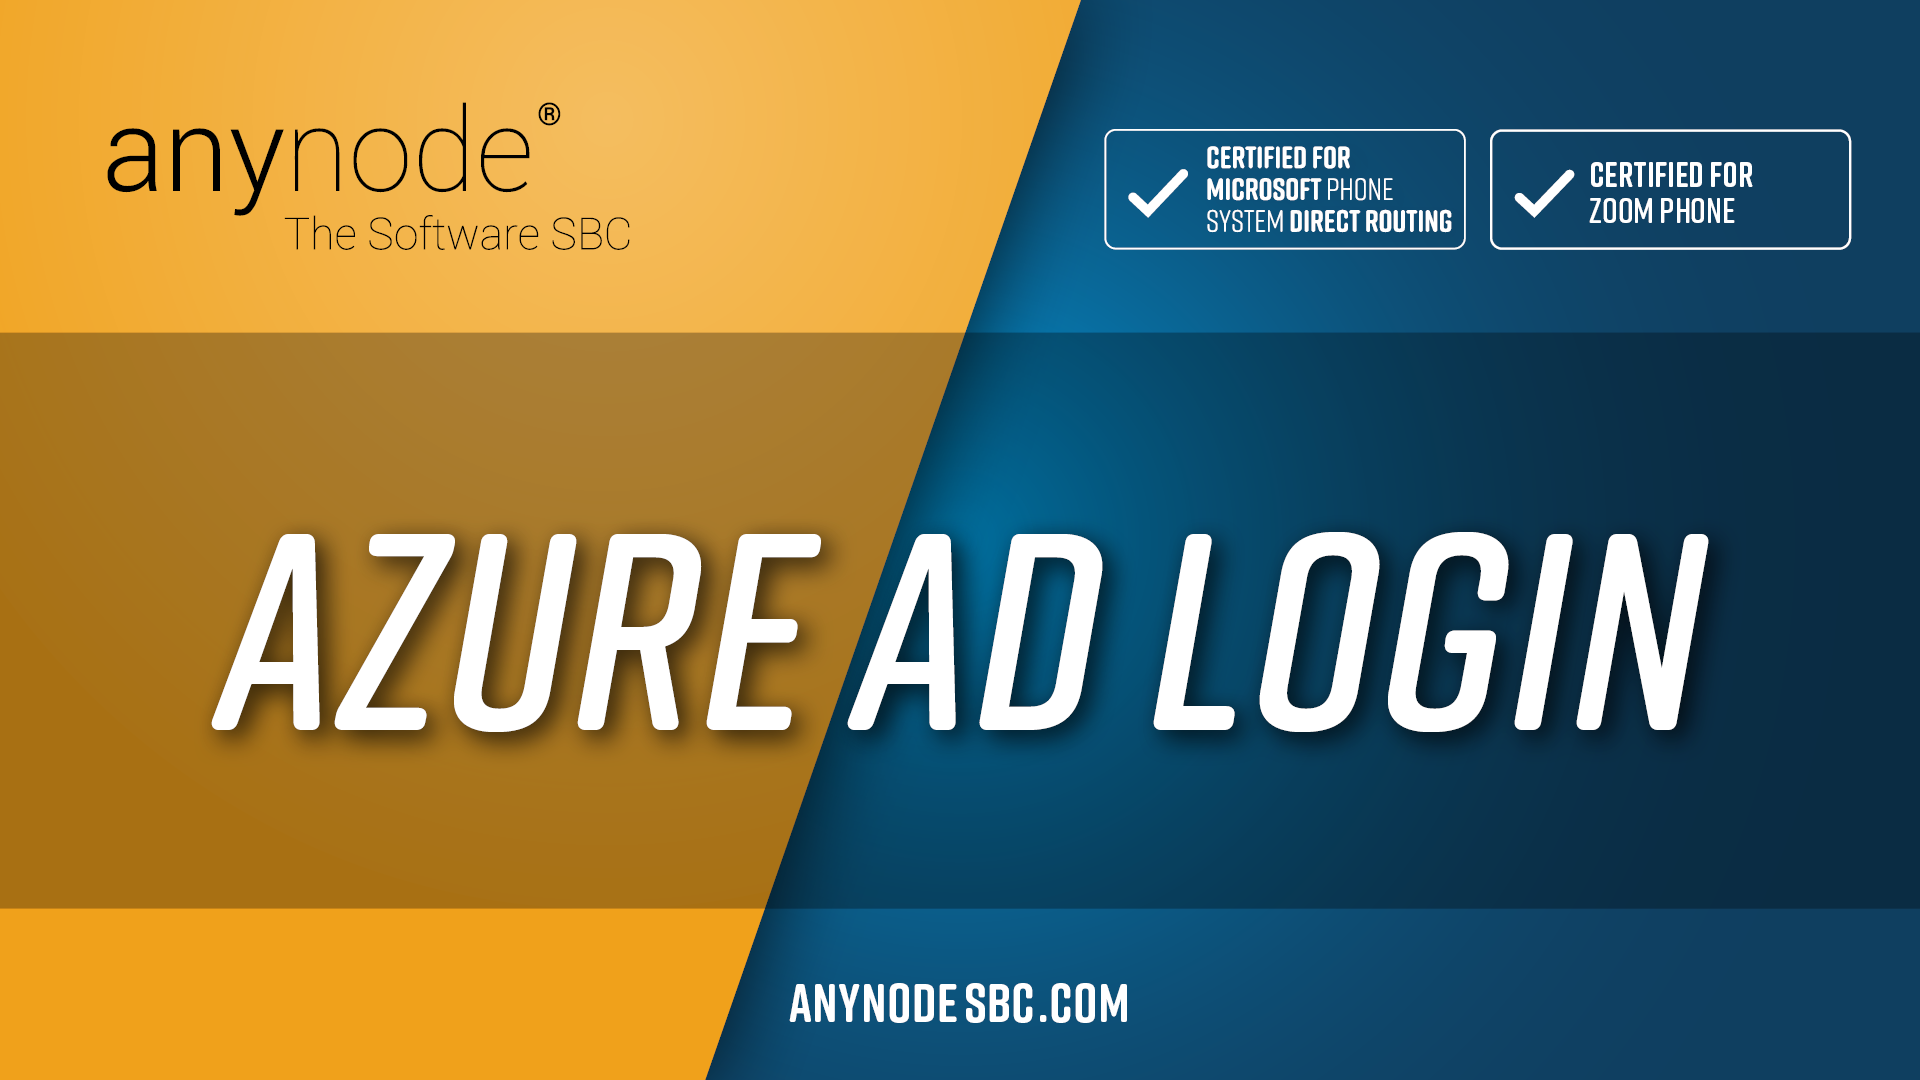 Features: Azure AD Login